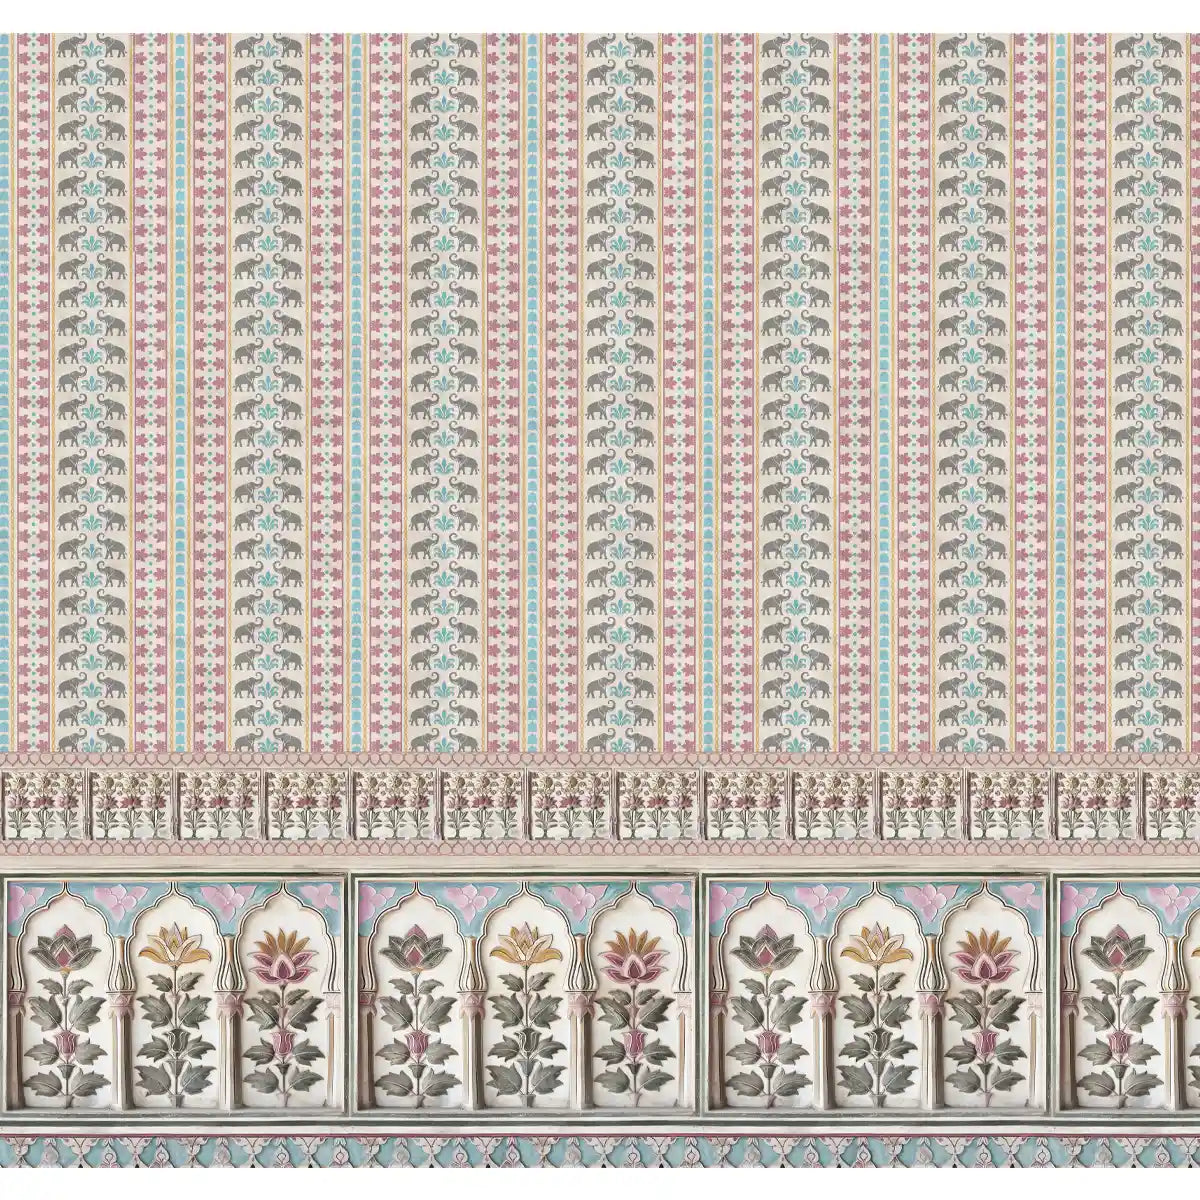 Shop Kala Heritage Elegance: Intricate Indian Temple Art Wallpaper in Pink and Blue